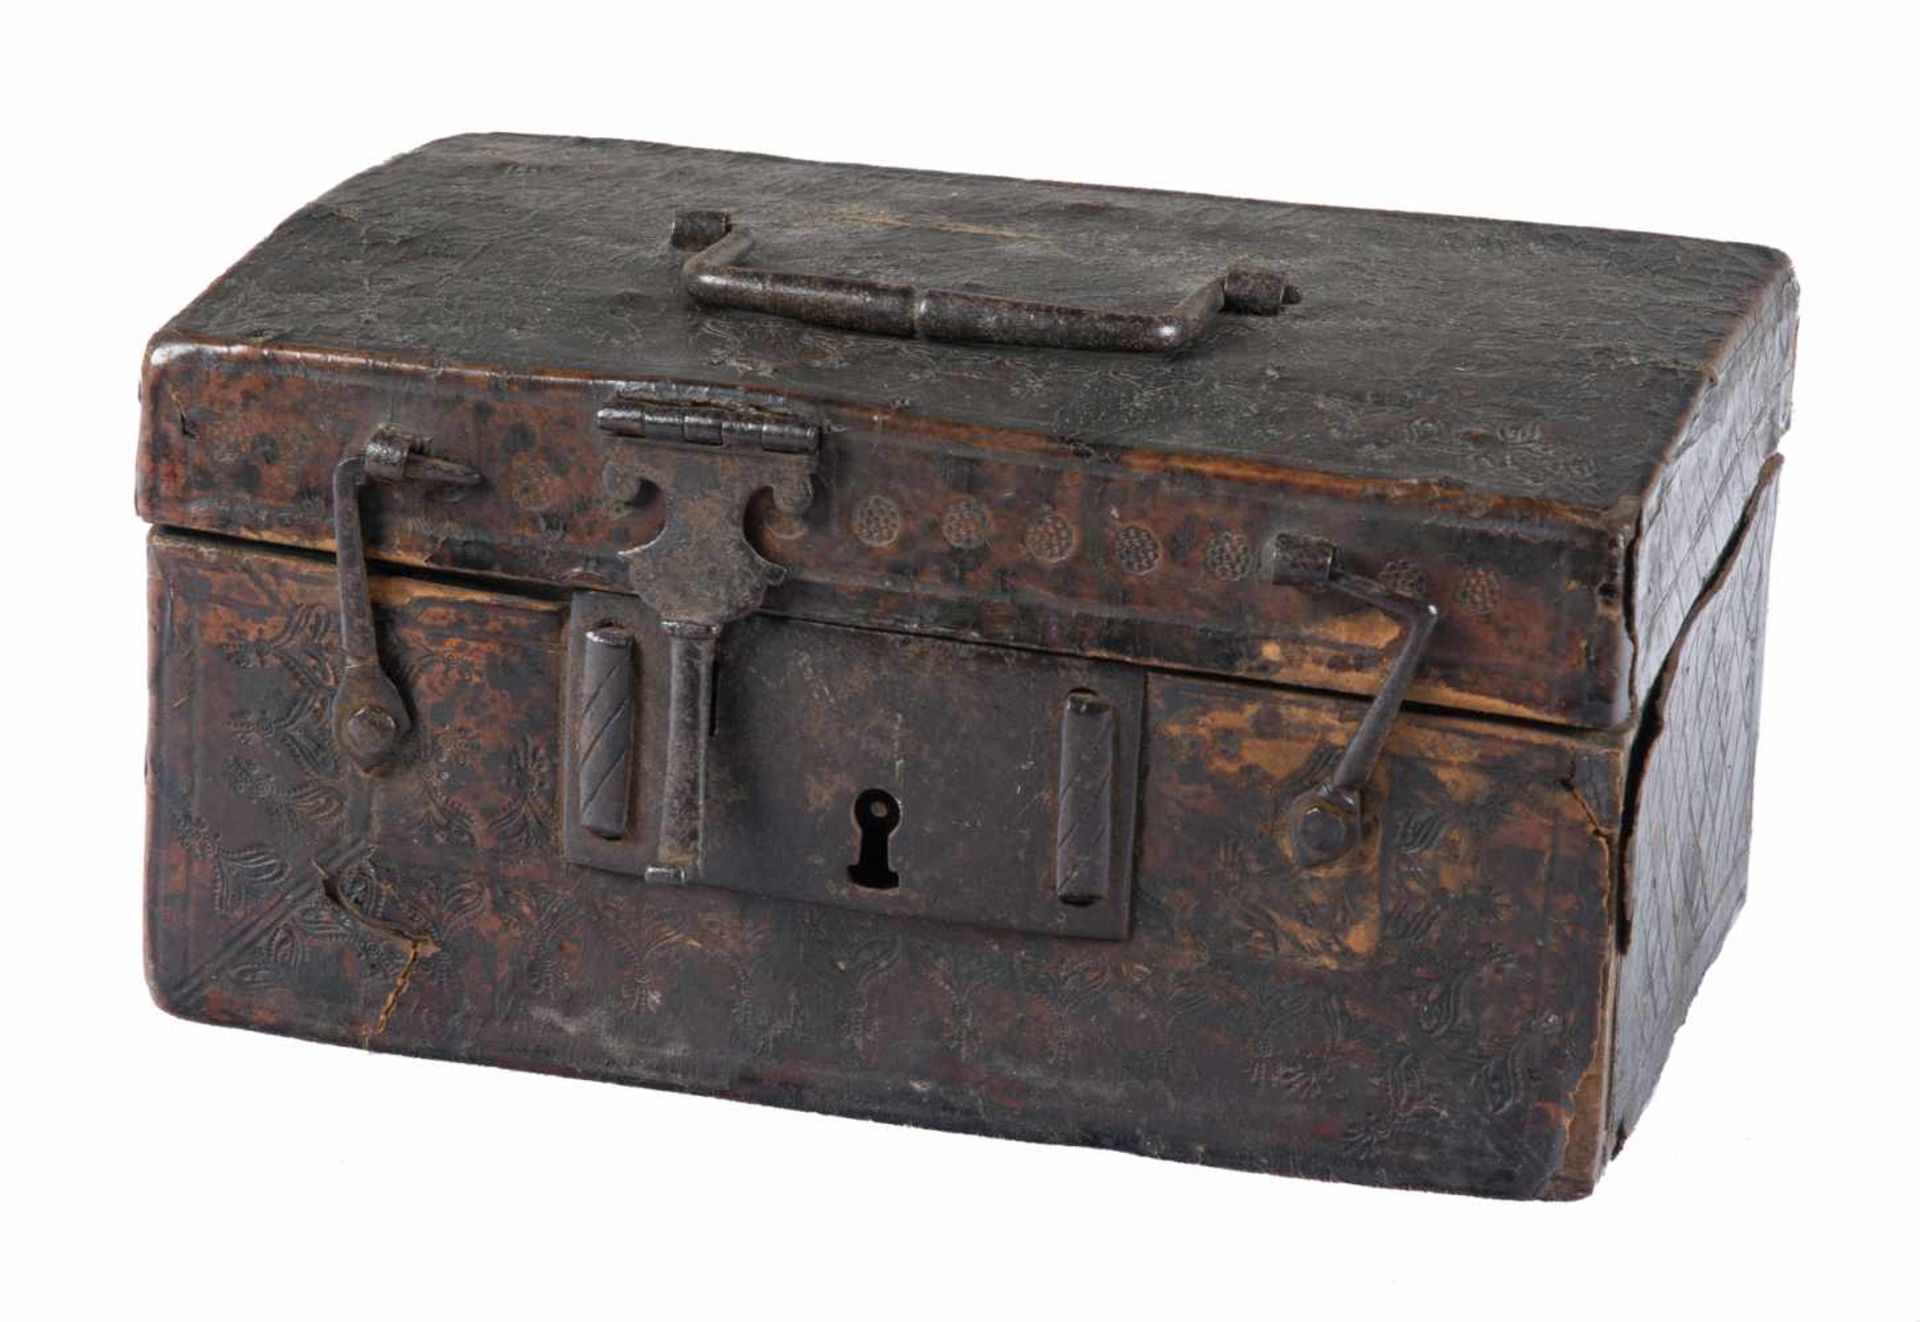 Engraved cordovan leather chest with iron fittings and wooden base. 15th century. ↵↵Flaws. 9 x 18